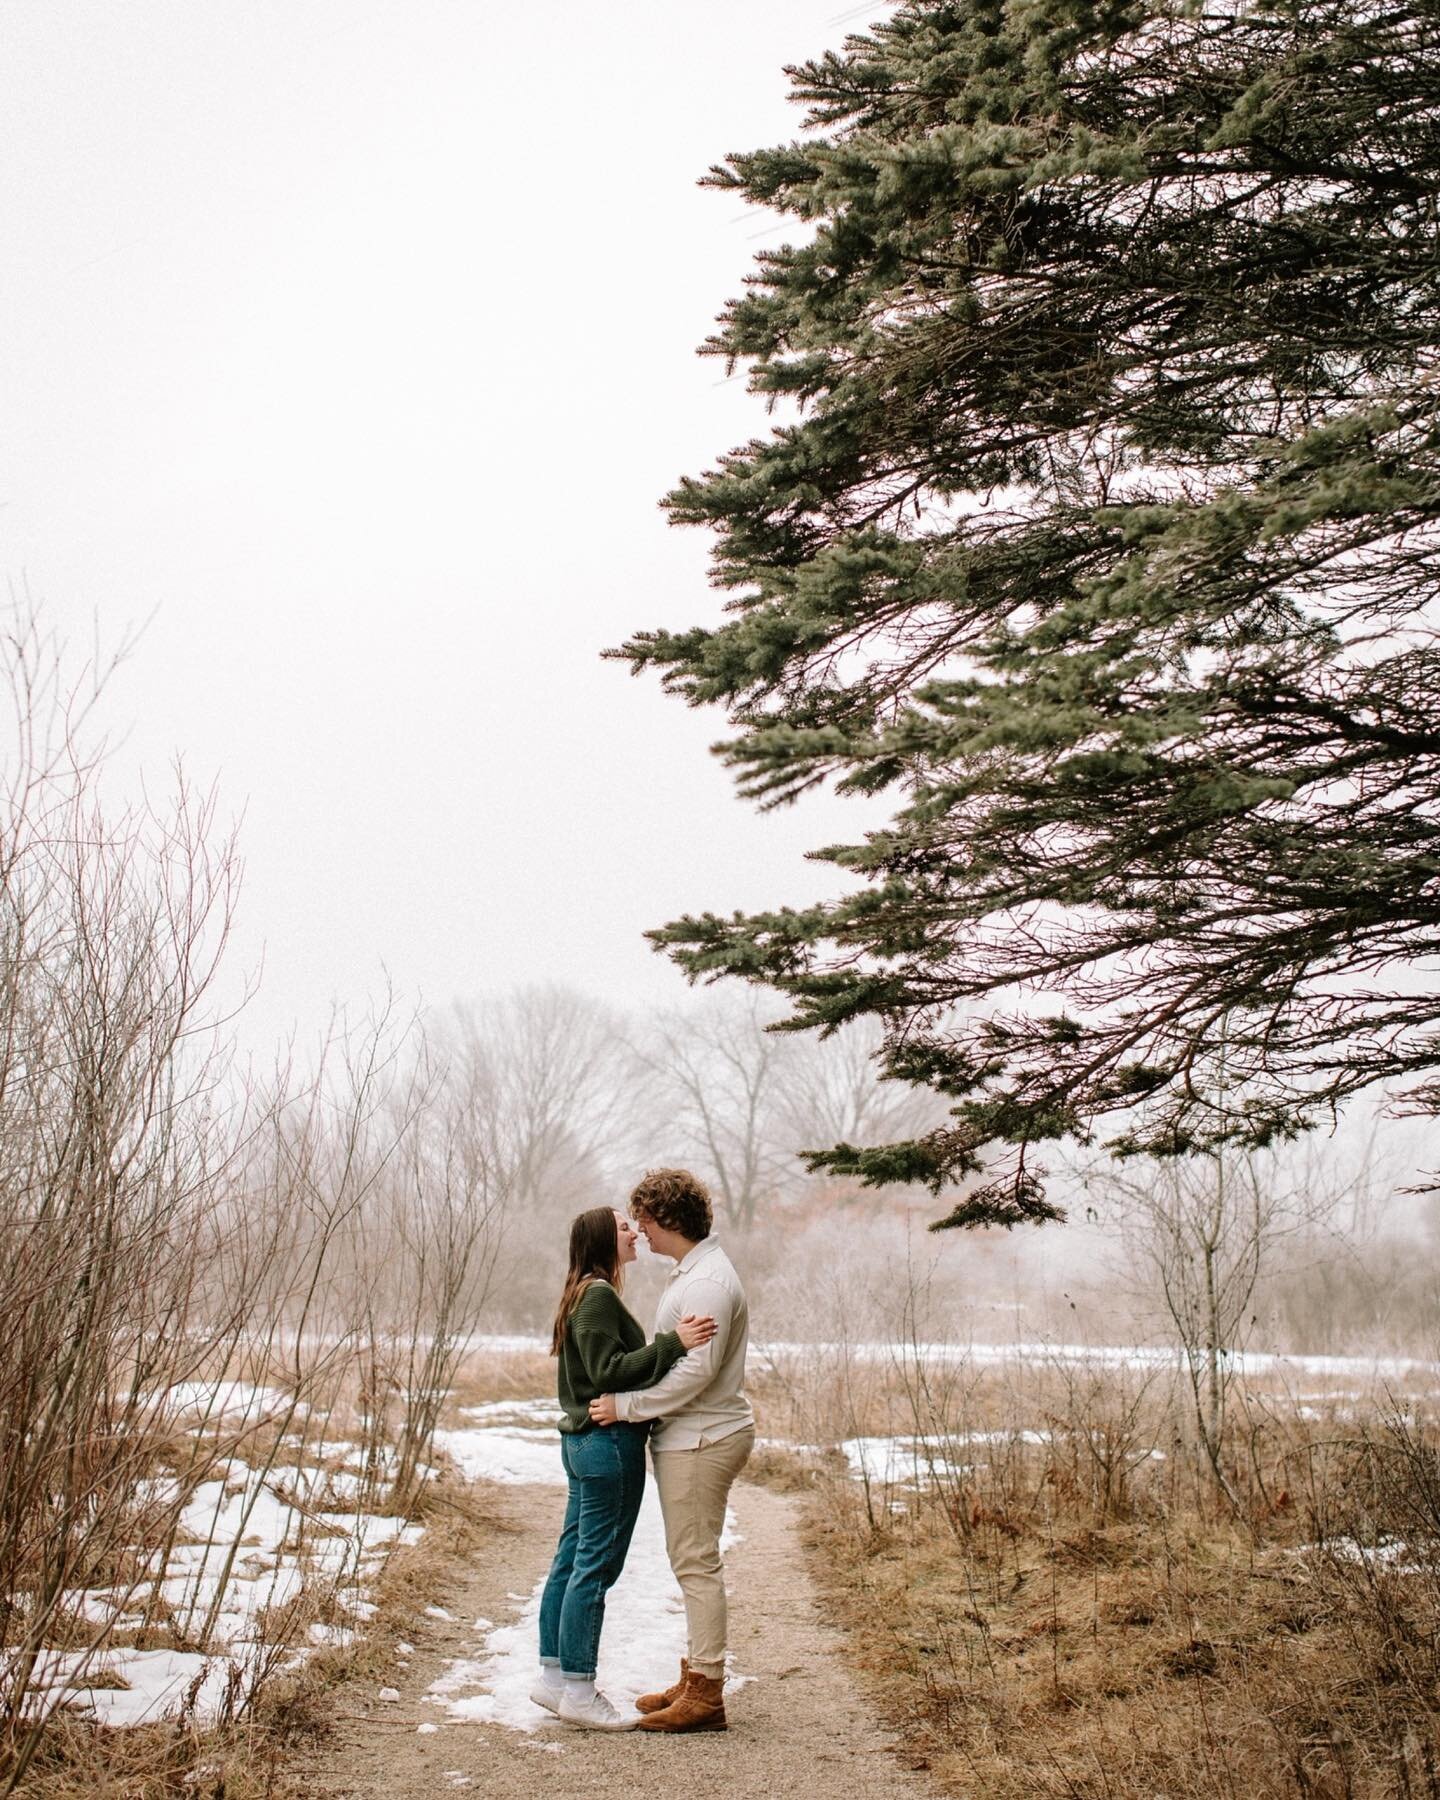 So excited for the weddings for these two next month! 
Did these back in Feb. The weather was magical, foggy and frozen. February is a very underappreciated month for photos! Check out that ring shot 😍 

We made Twilight jokes the entire time, appar